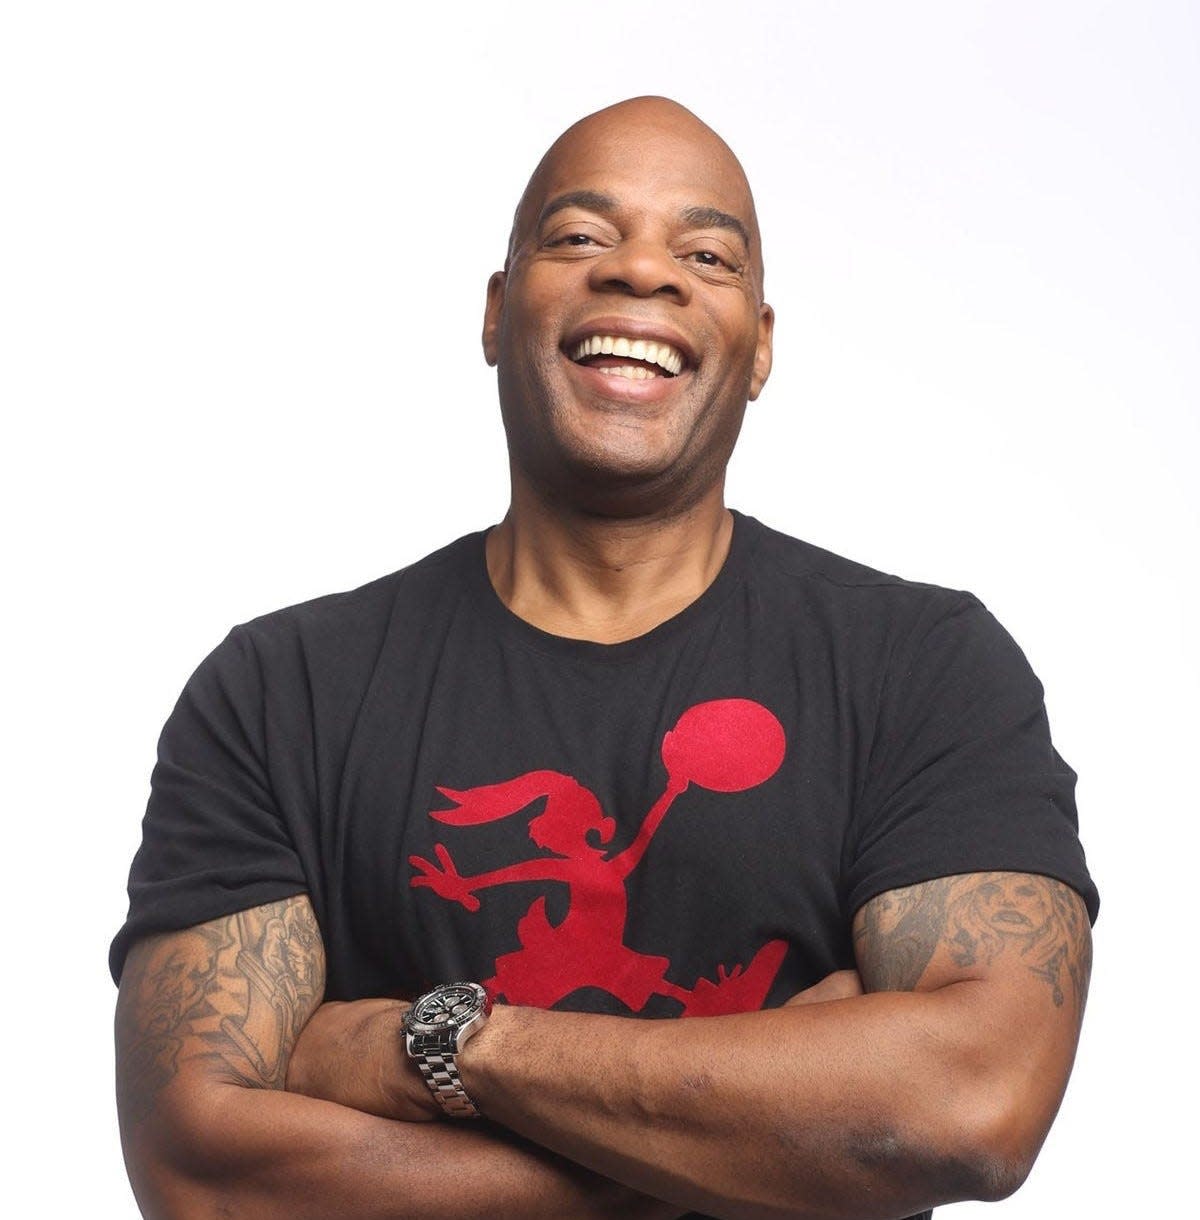 Alonzo Bodden comes to town as part of the popular NPR new quiz show Wait Wait ... Don't Tell Me. The show takes place Oct. 7 at Taft Theatre.